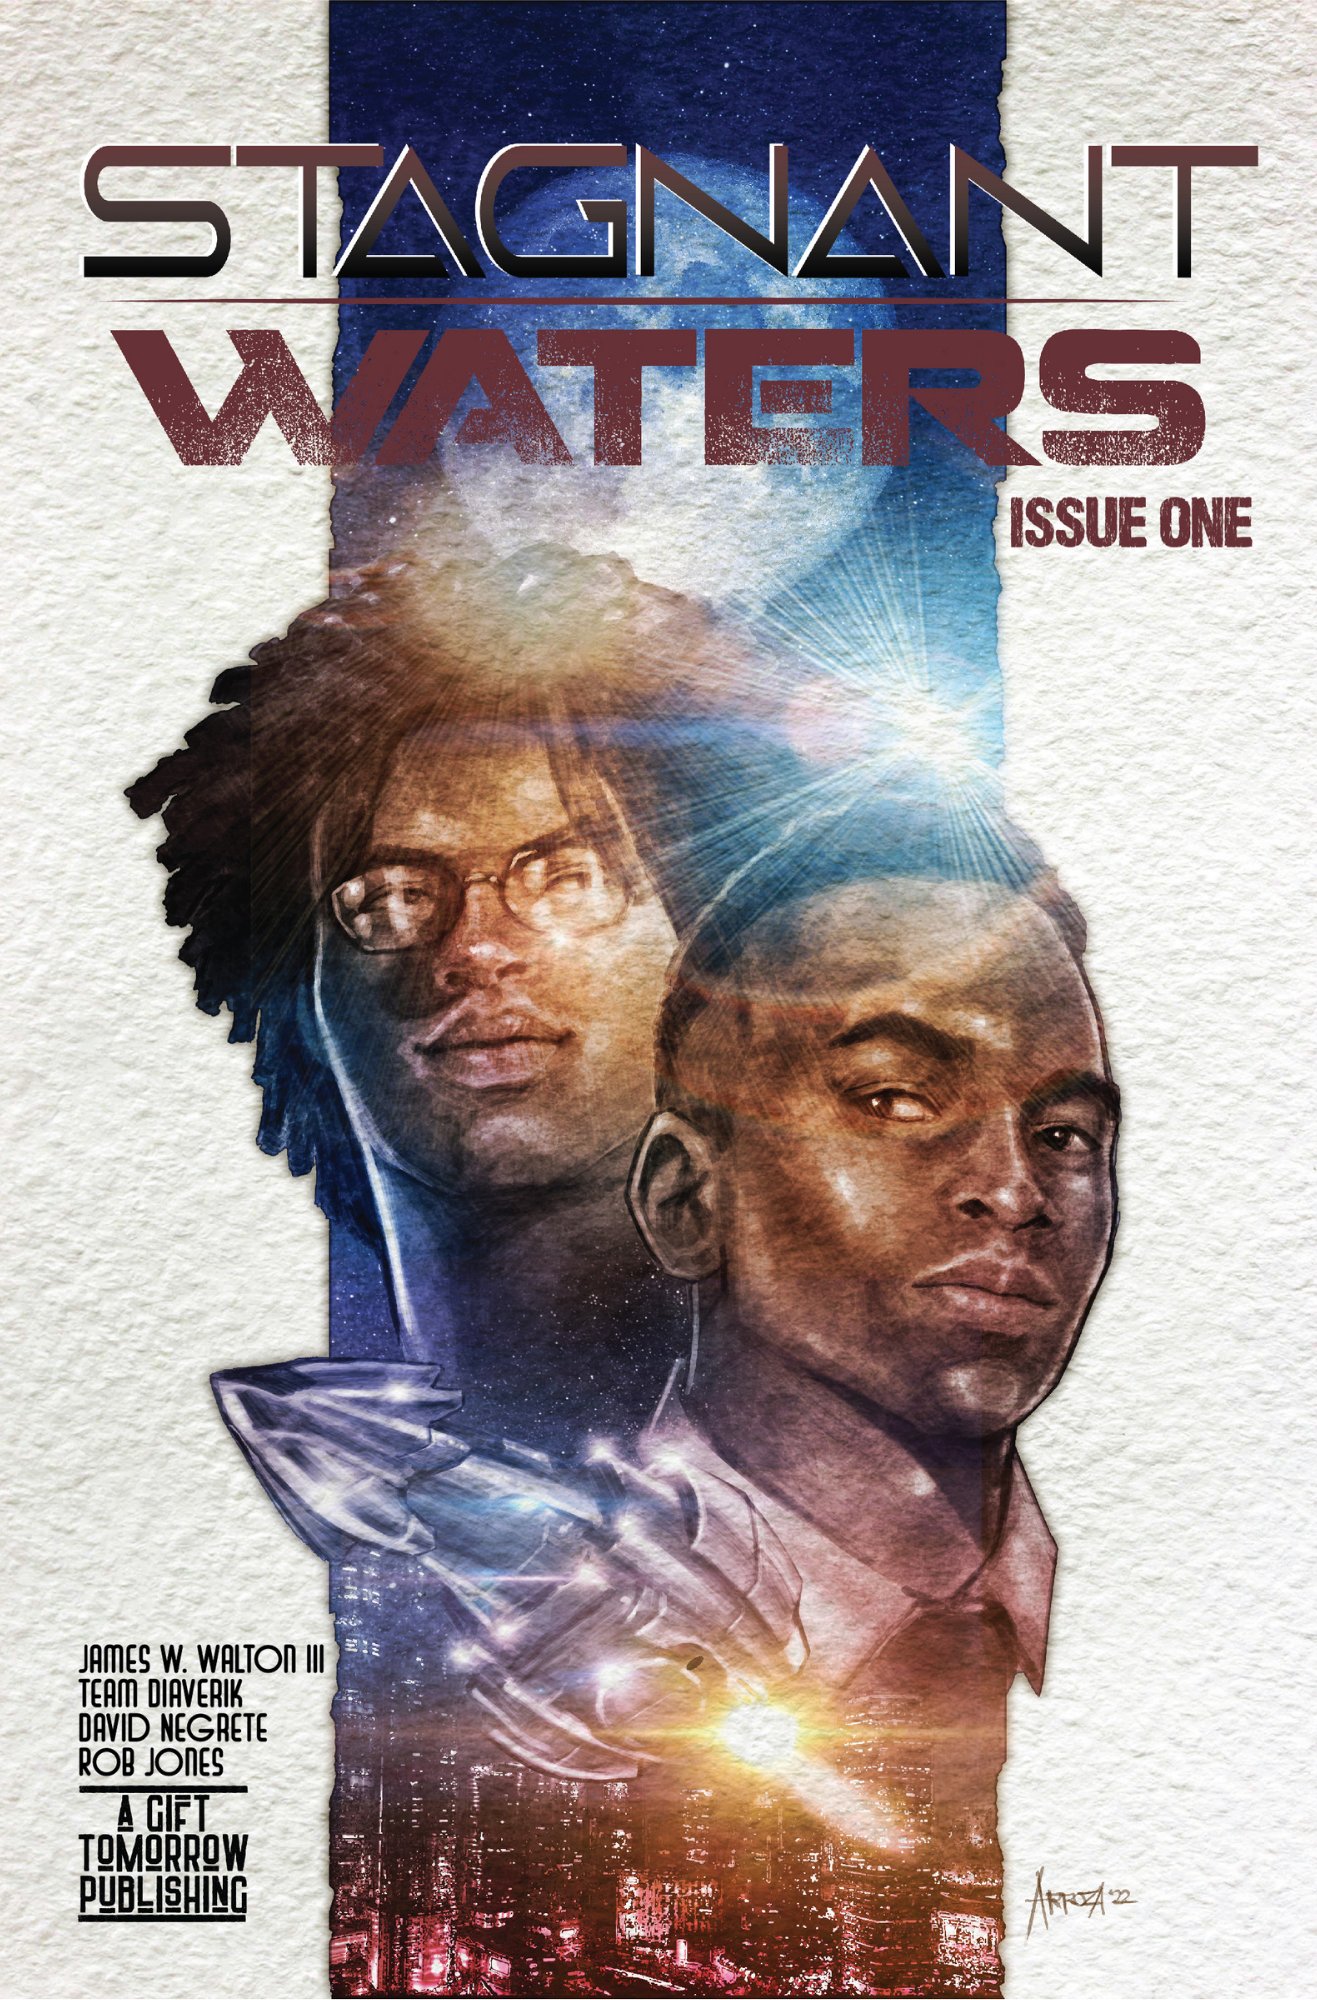 Stagnant Waters - Issue One: A Matter of Fate